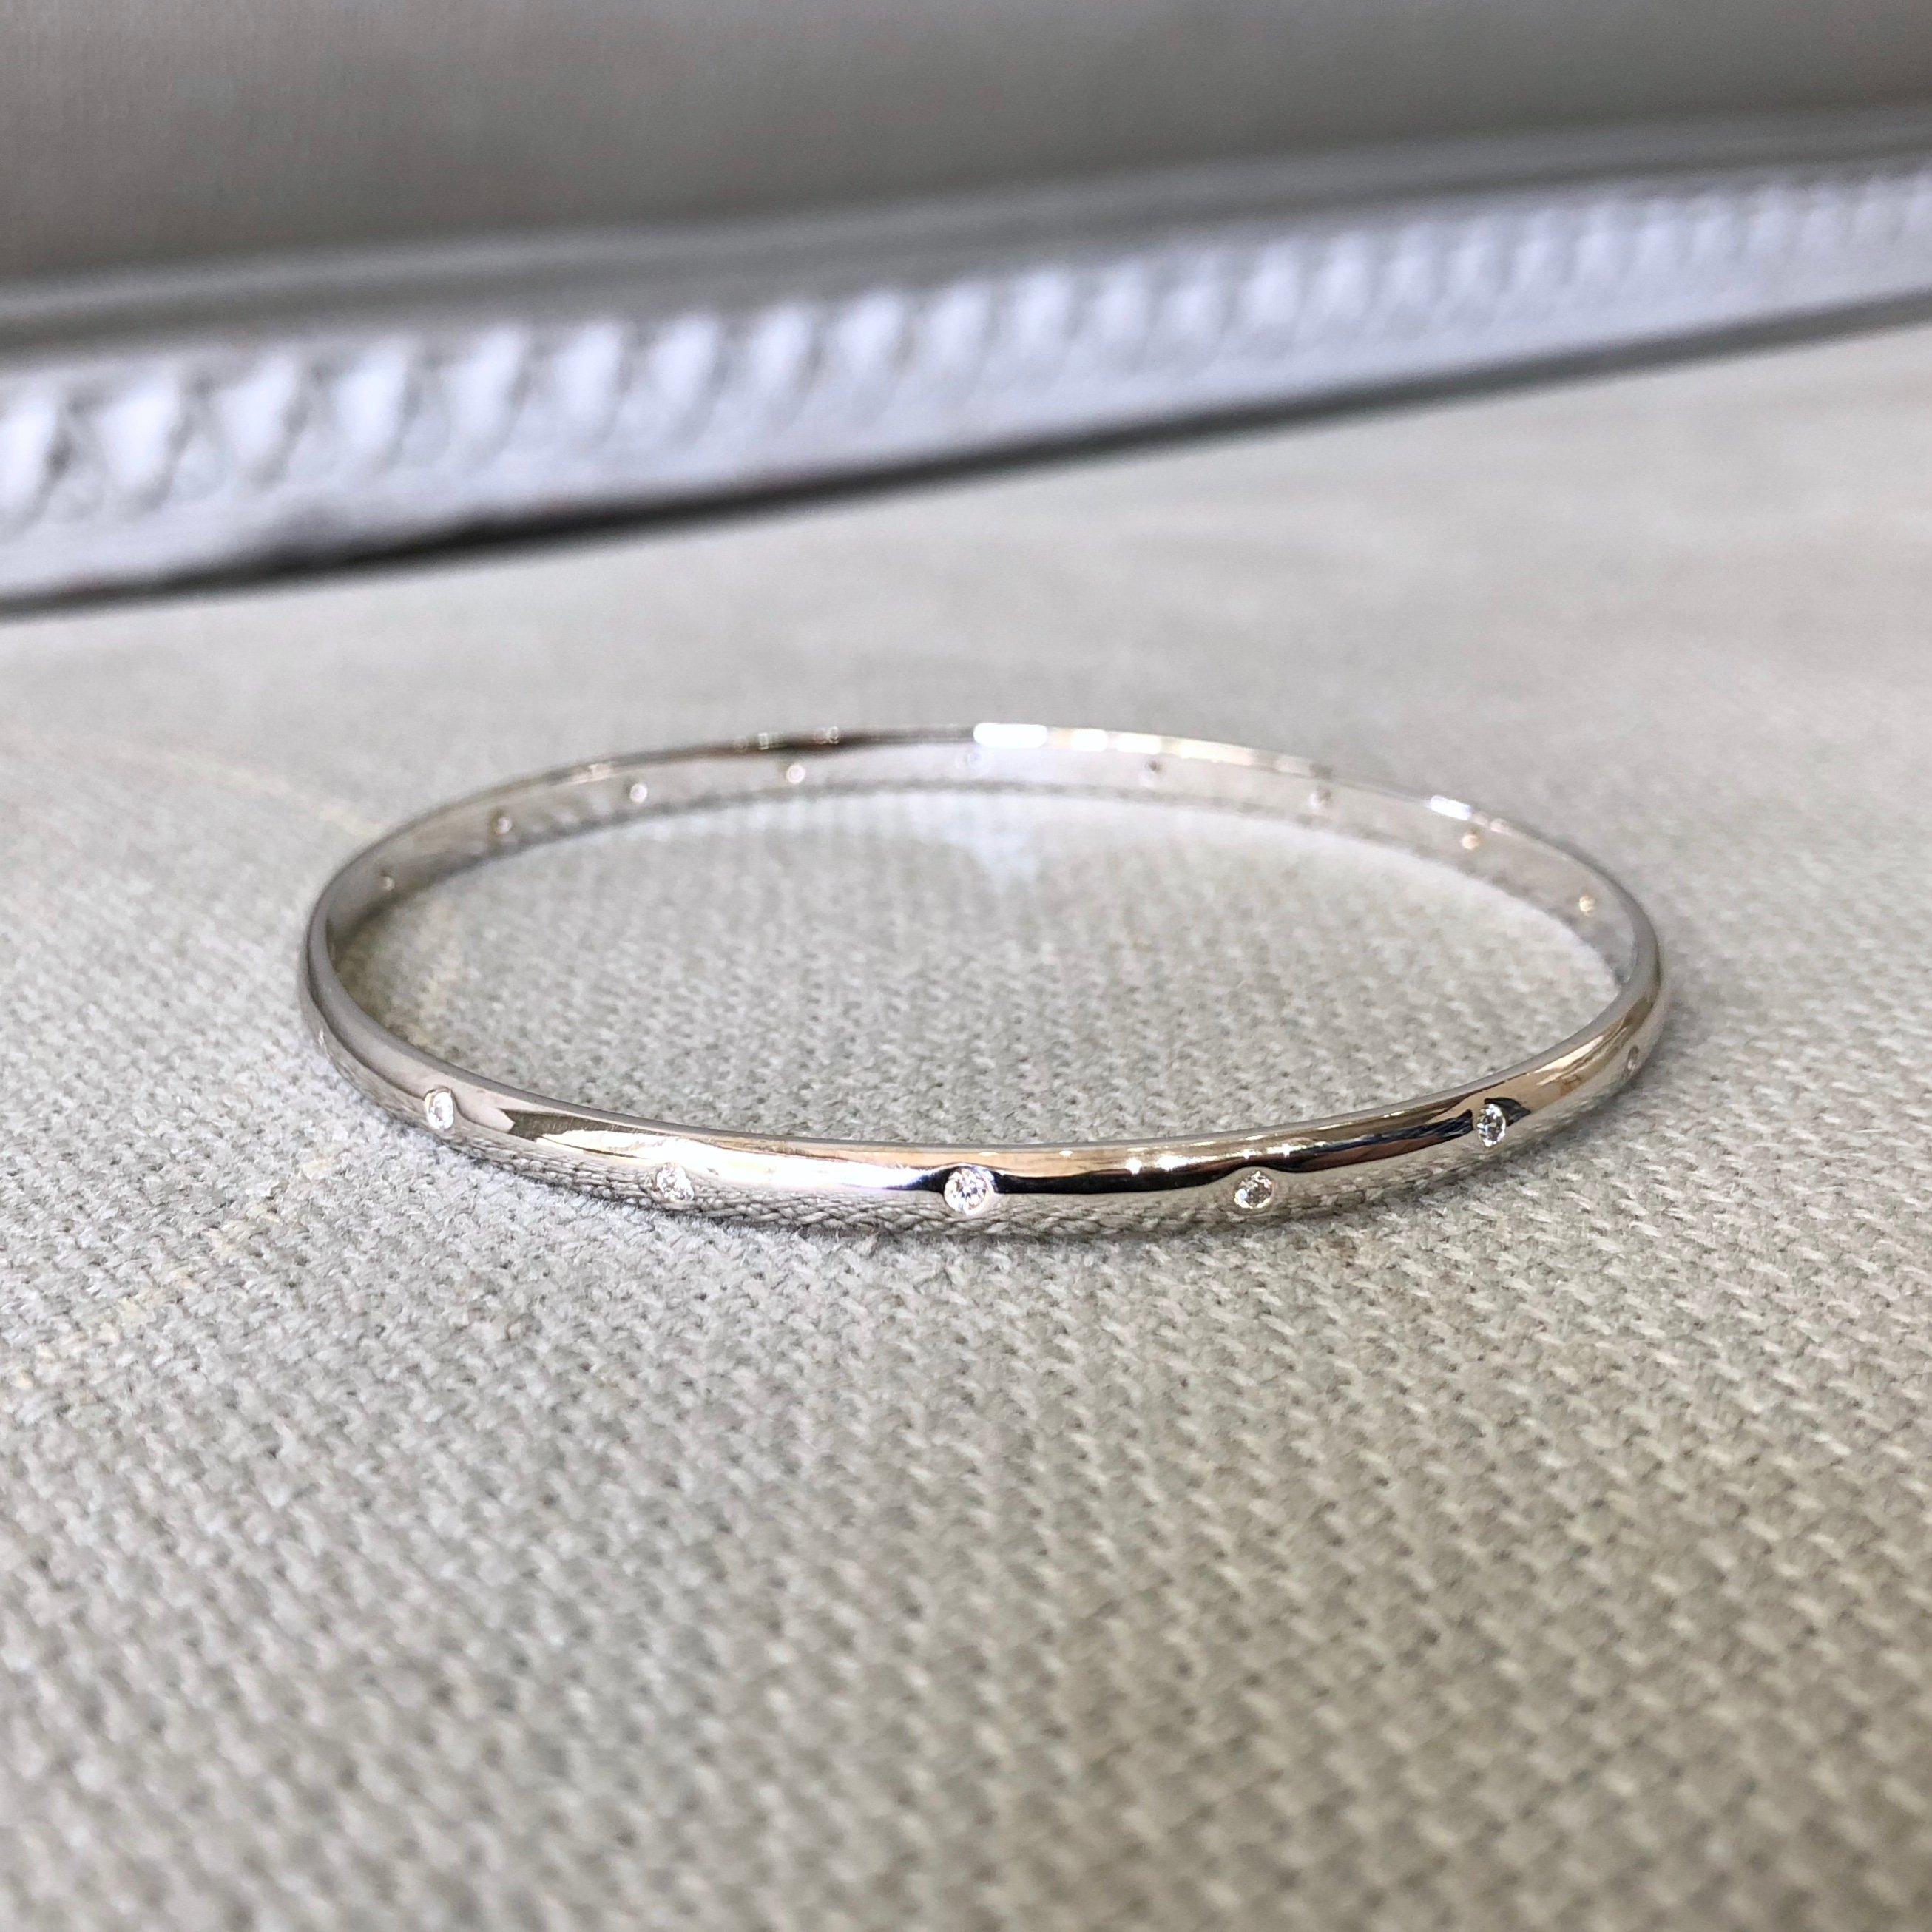 A ladies 14k white gold round bangle contains eighteen (18) burnish set Round Brilliant Cut Diamonds that measure 1.7mm x 1.7mm and weigh a total of 0.36 carats with Color Grade G and Clarity Grade VS-SI. The bangle weighs 12.5 grams (8 pennyweight)